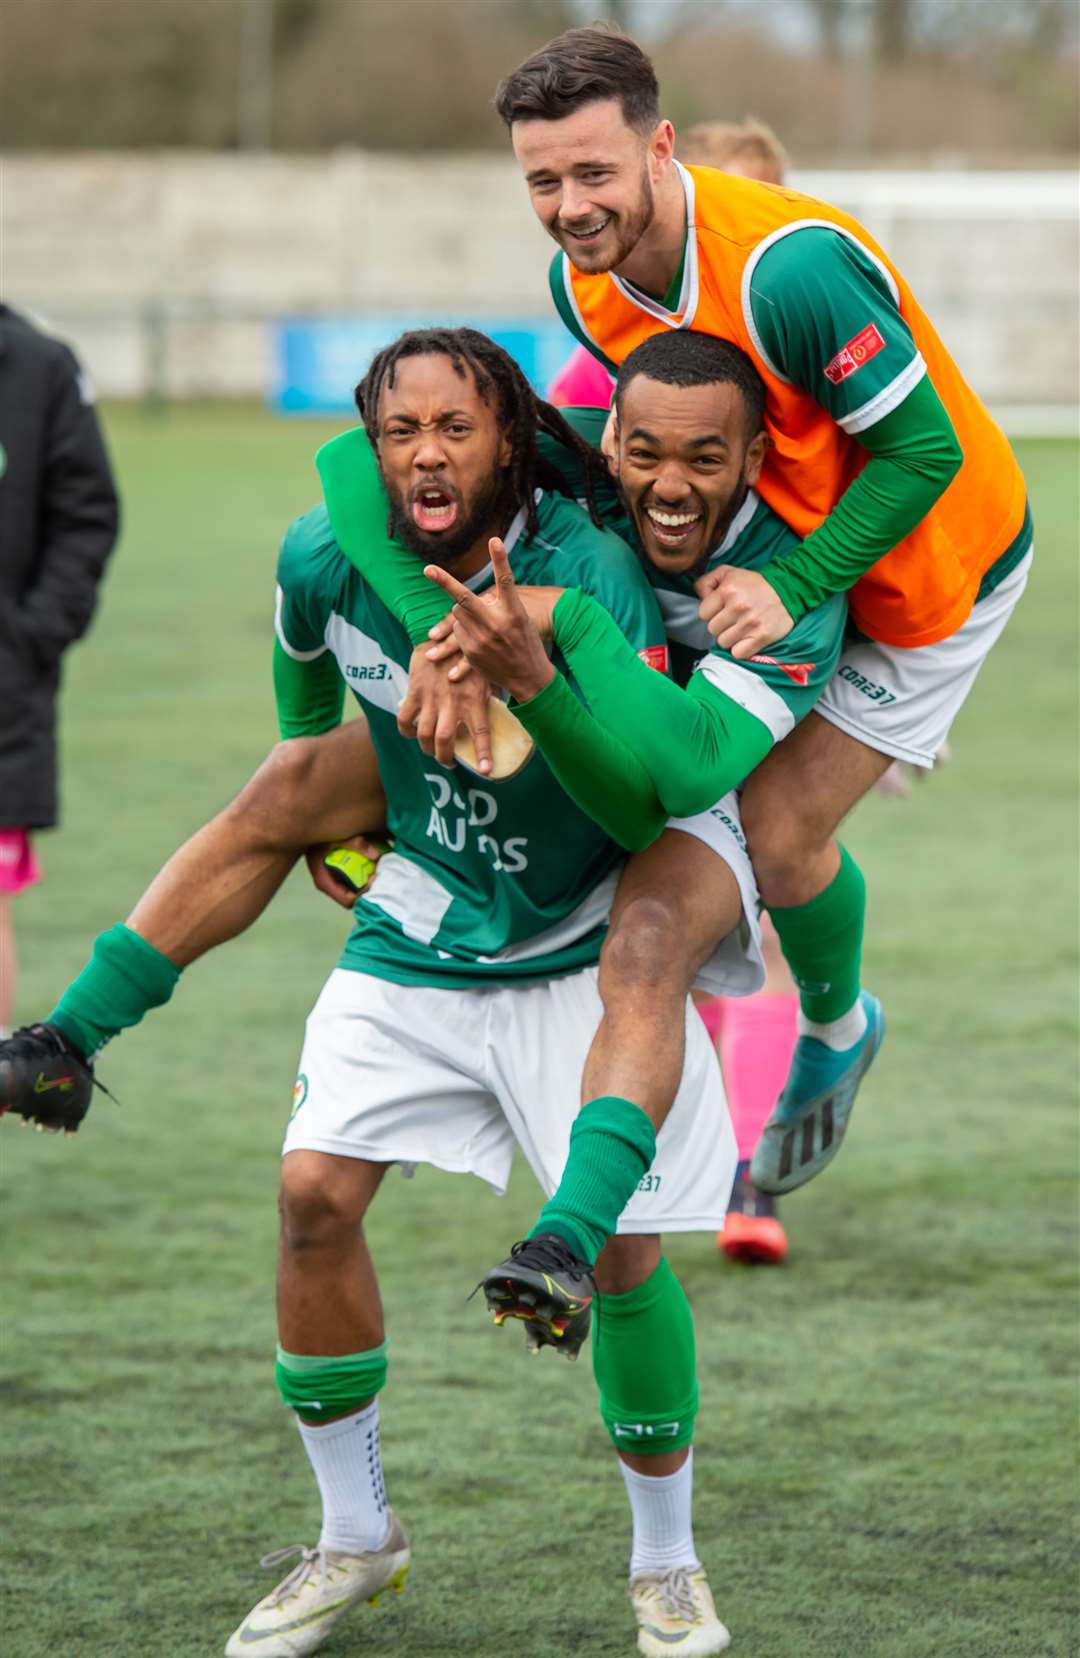 Bradley Simms, Tariq Ossai and Danny Parish celebrate Ashford's victory over Lancing. Picture: Ian Scammell